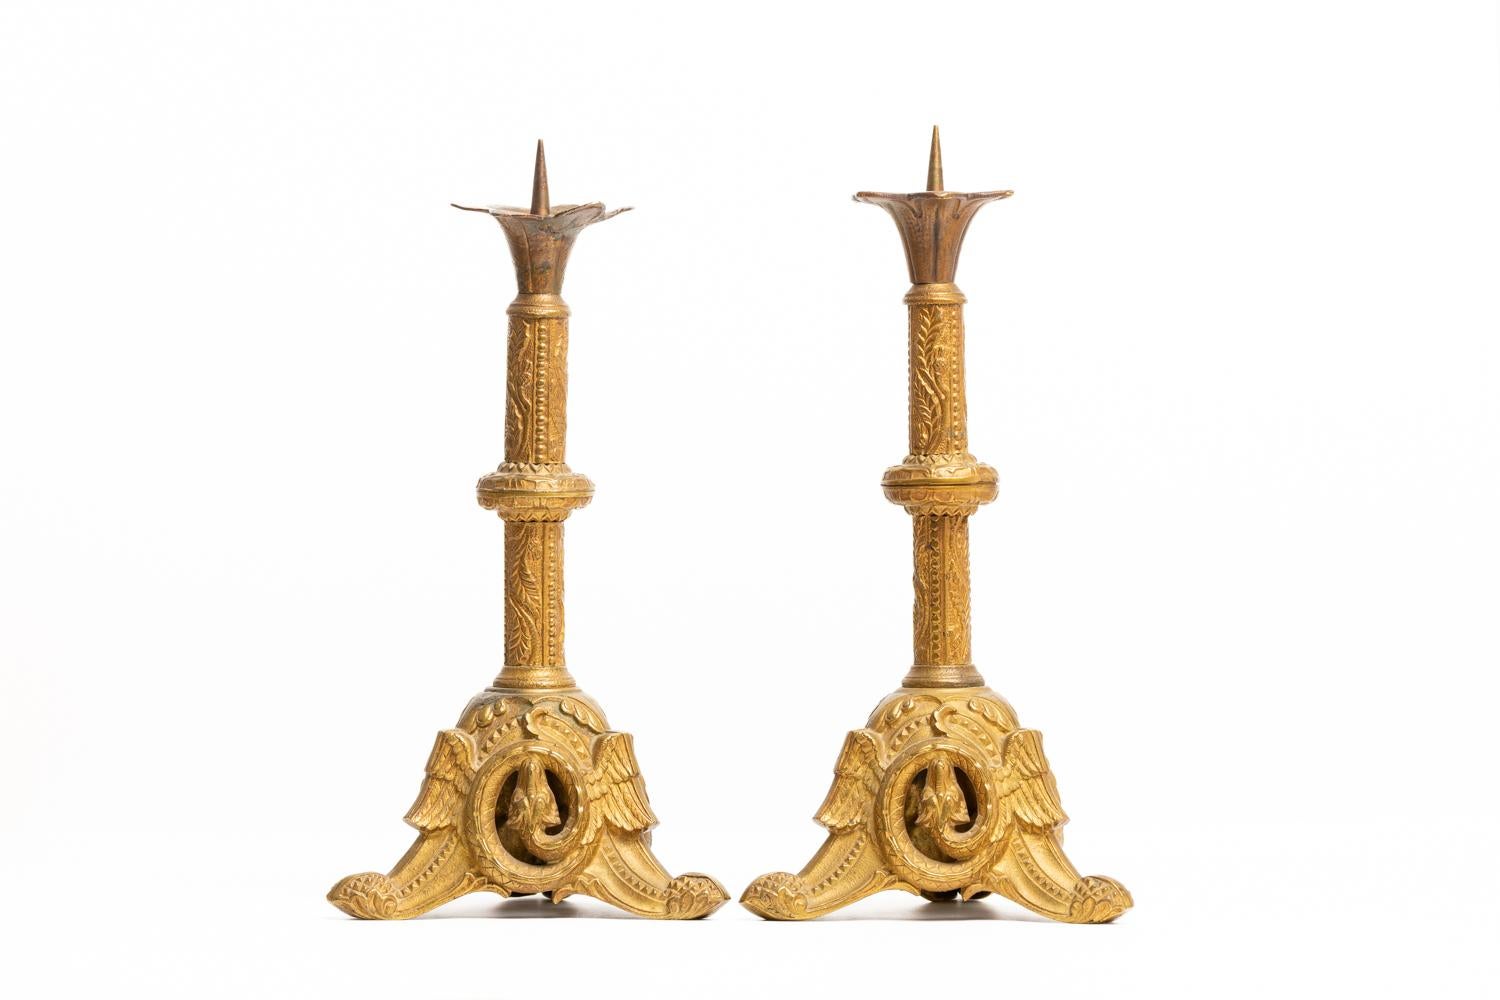 Gothic Revival Antique 19th Century French Brass Pricket Candlesticks  For Sale